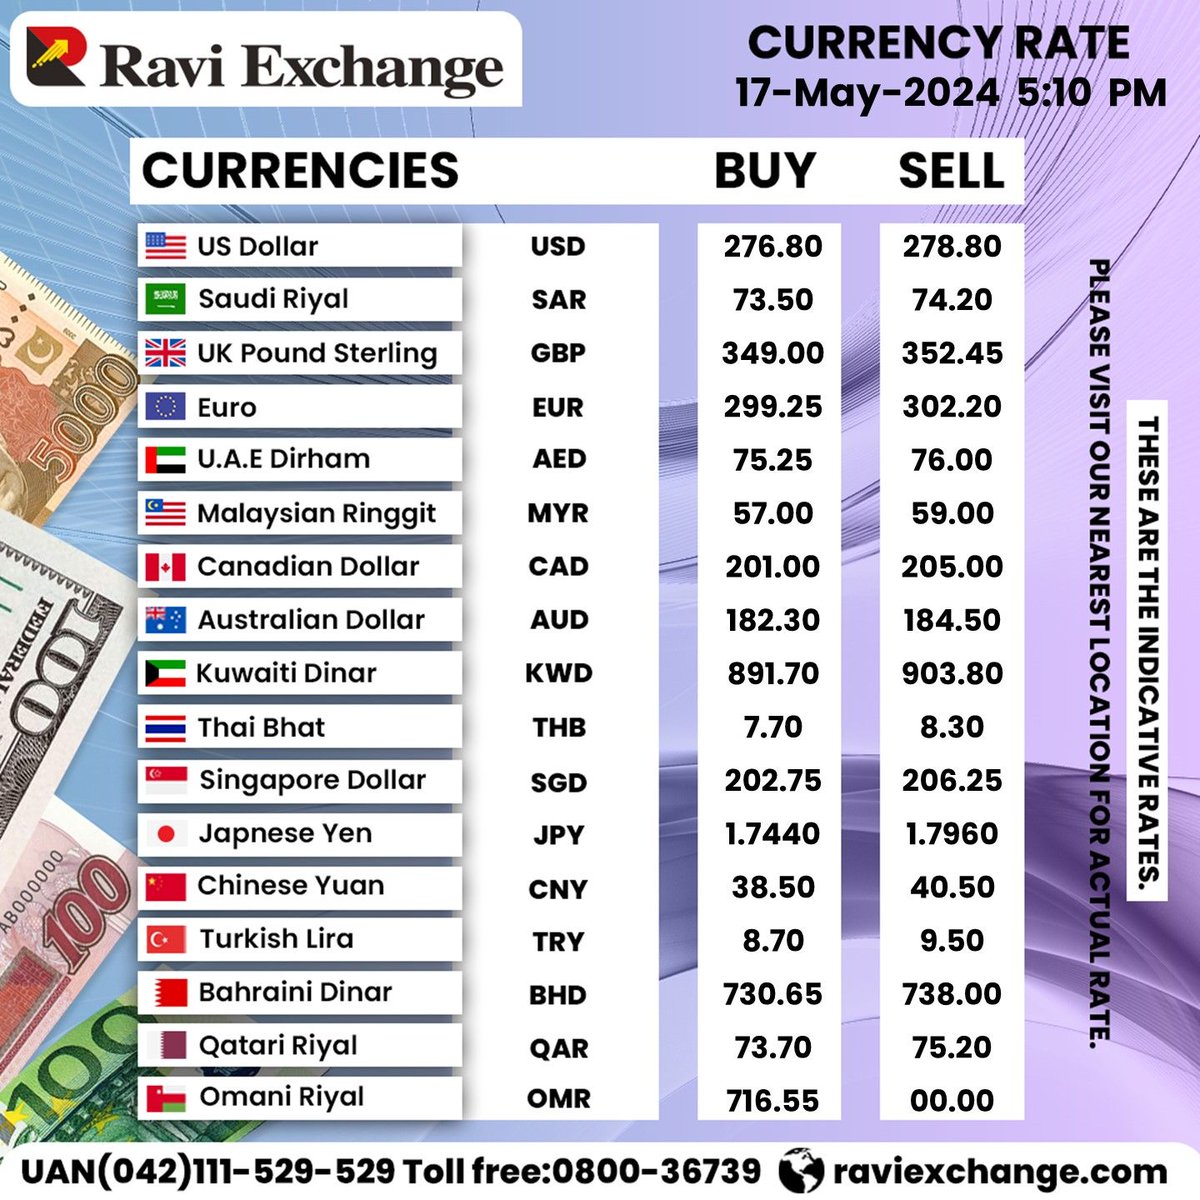 Today Rates Update
𝐂𝐮𝐫𝐫𝐞𝐧𝐜𝐲 𝐑𝐚𝐭𝐞𝐬 17-May-2024
Follow Our Page For More Updates
𝐂𝐨𝐧𝐭𝐚𝐜𝐭 𝐧𝐨: 042-111-529-529
#Raviexchange #MoneyGram #ExchangeRates #DollarRate #RiyalRate #dirhamtopkr #eurorate #WesternUnion